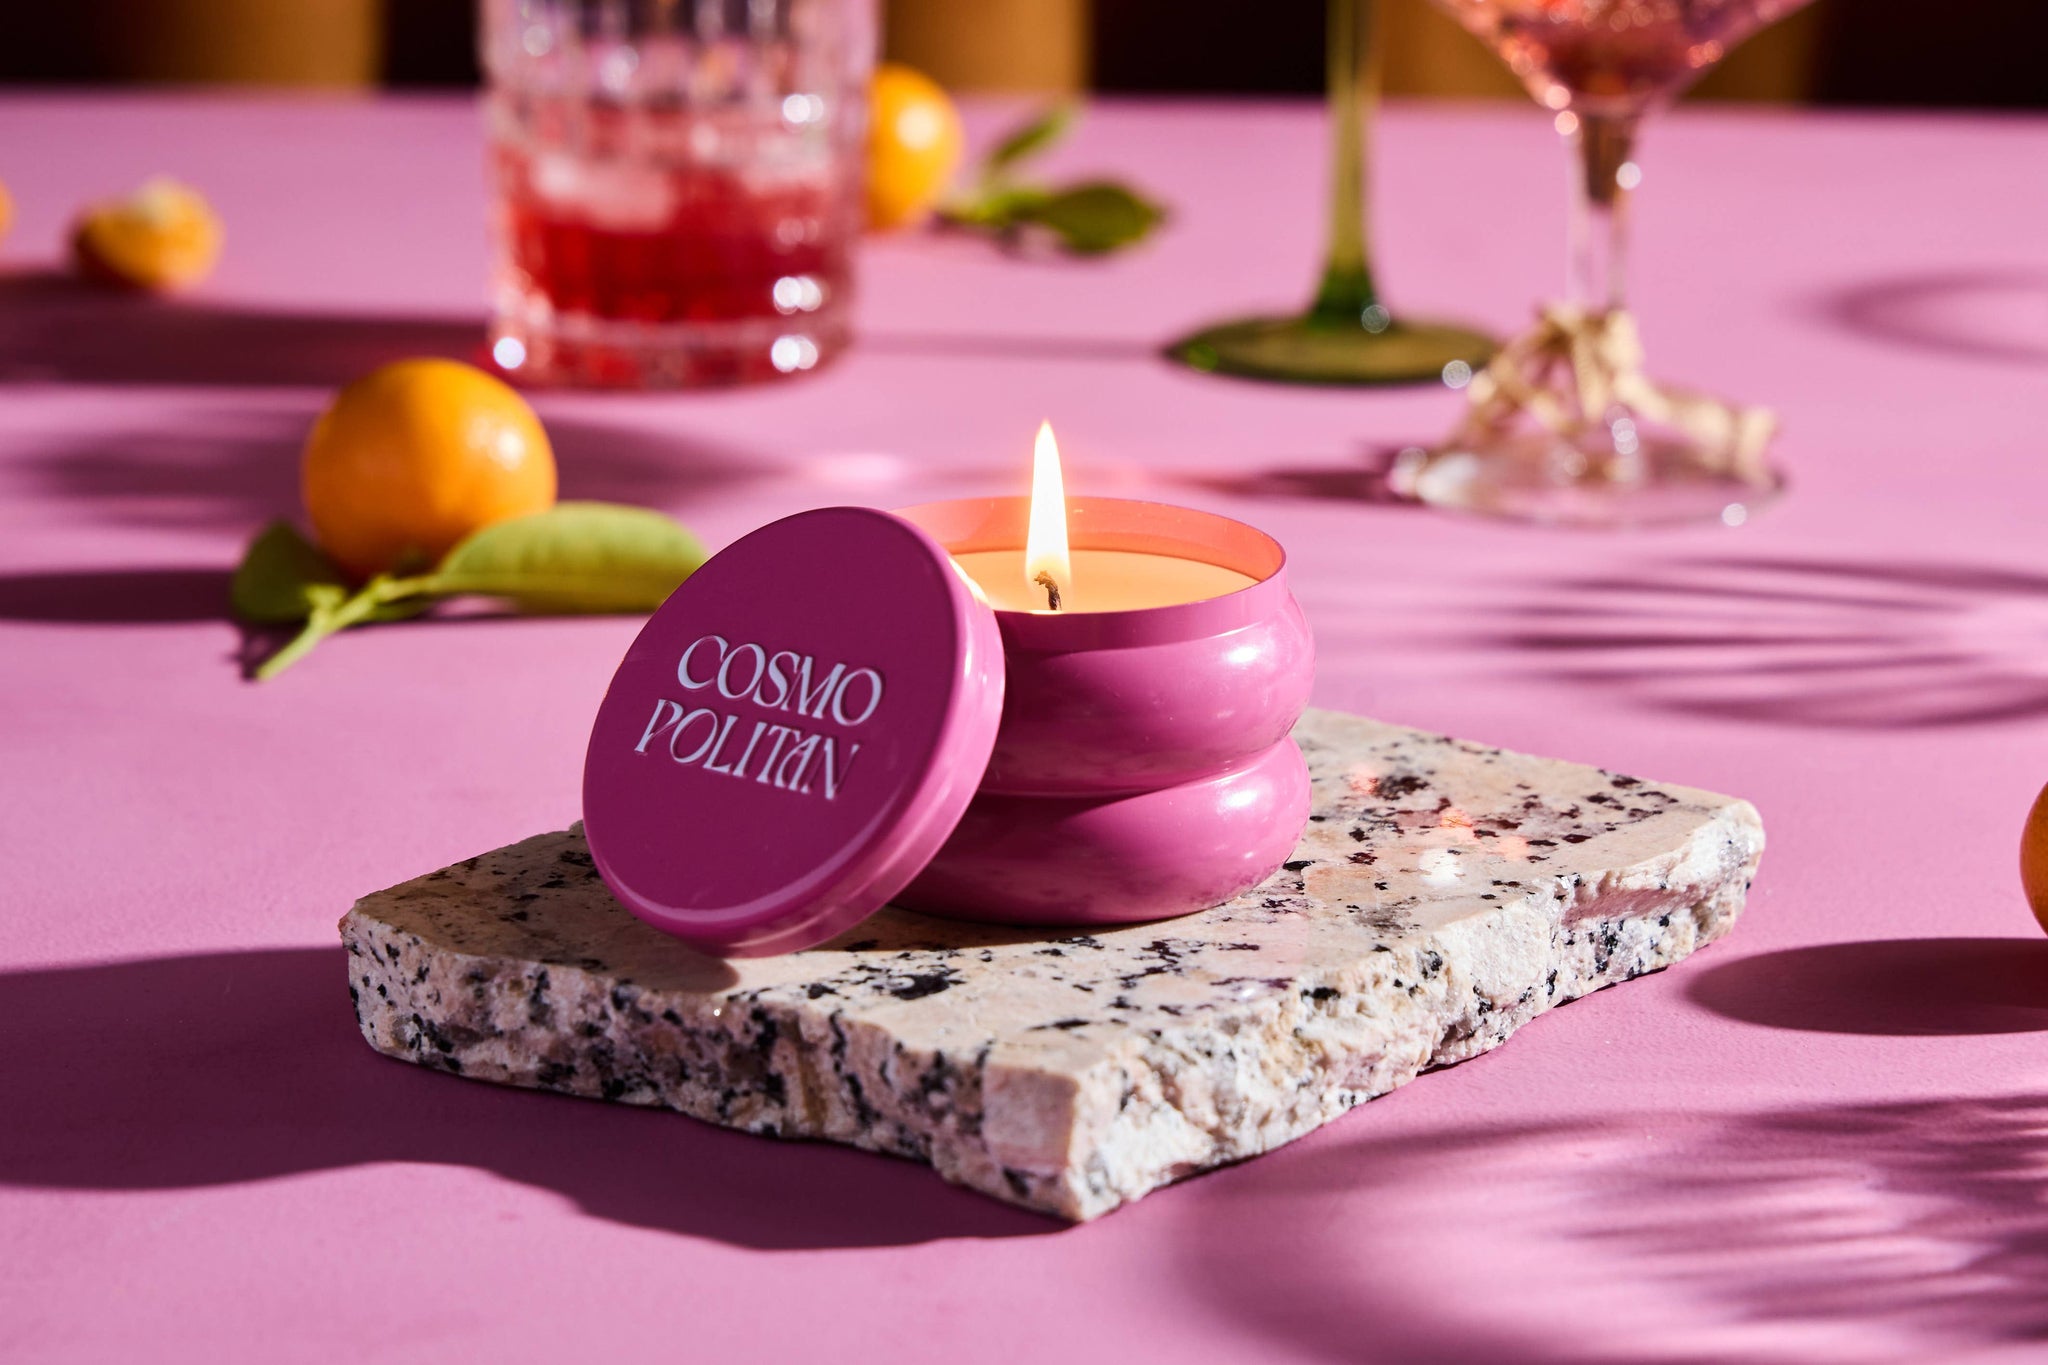 "Cosmopolitan" Candle by Rewined